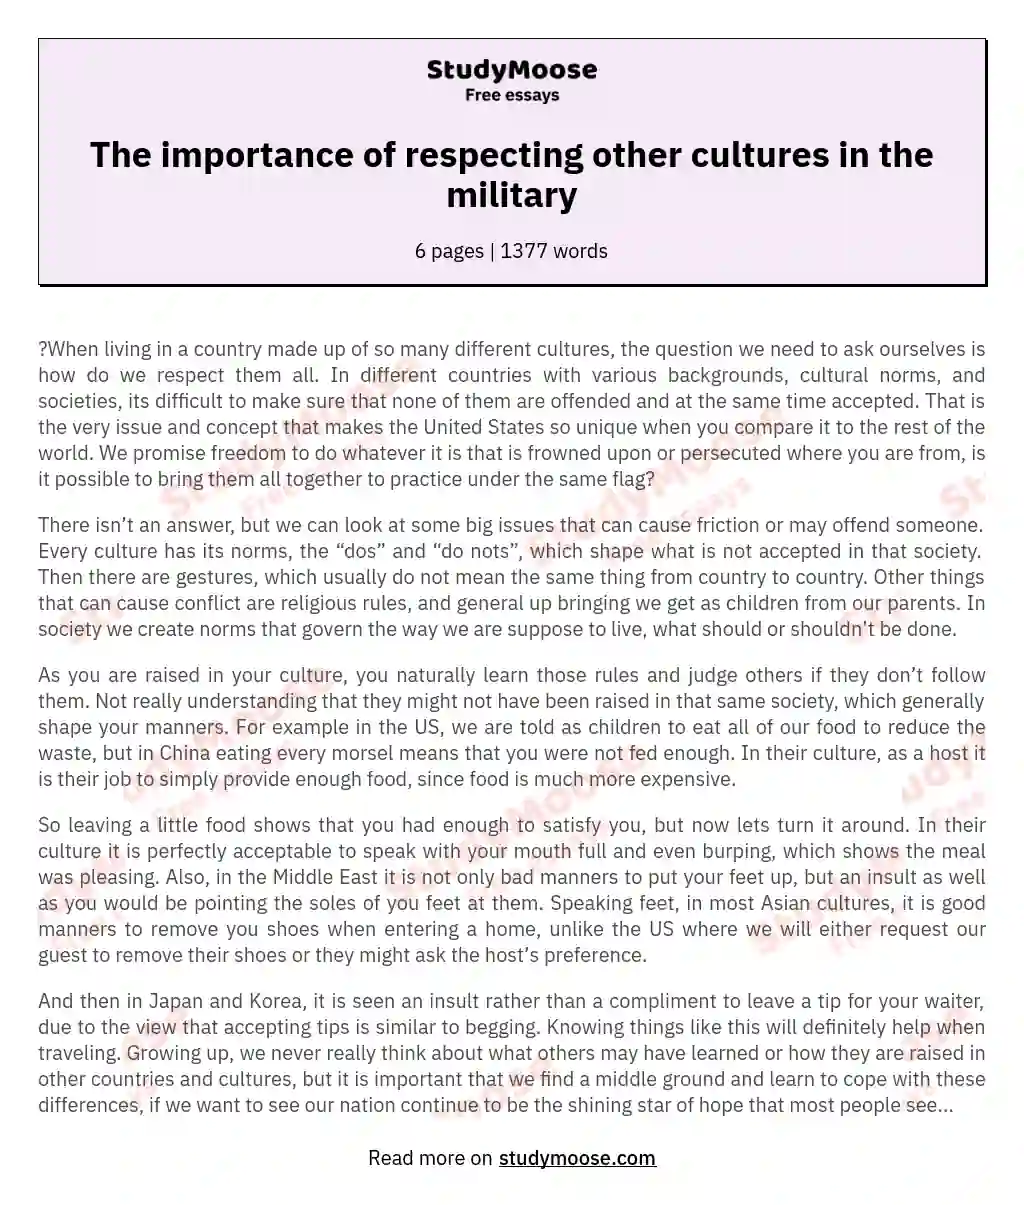 The importance of respecting other cultures in the military essay